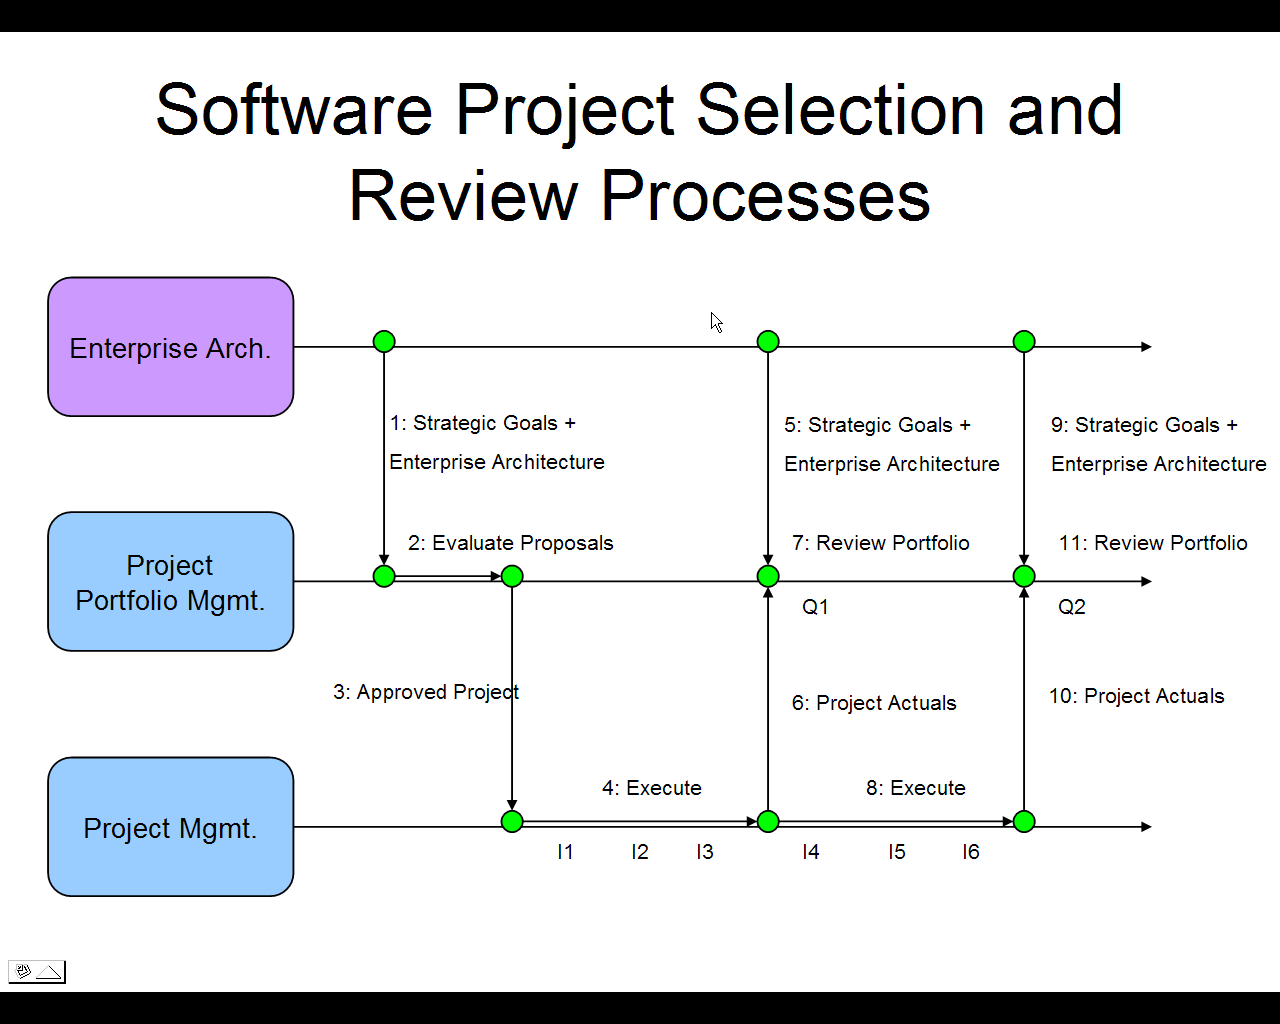 Software Project Selection and Review Processes